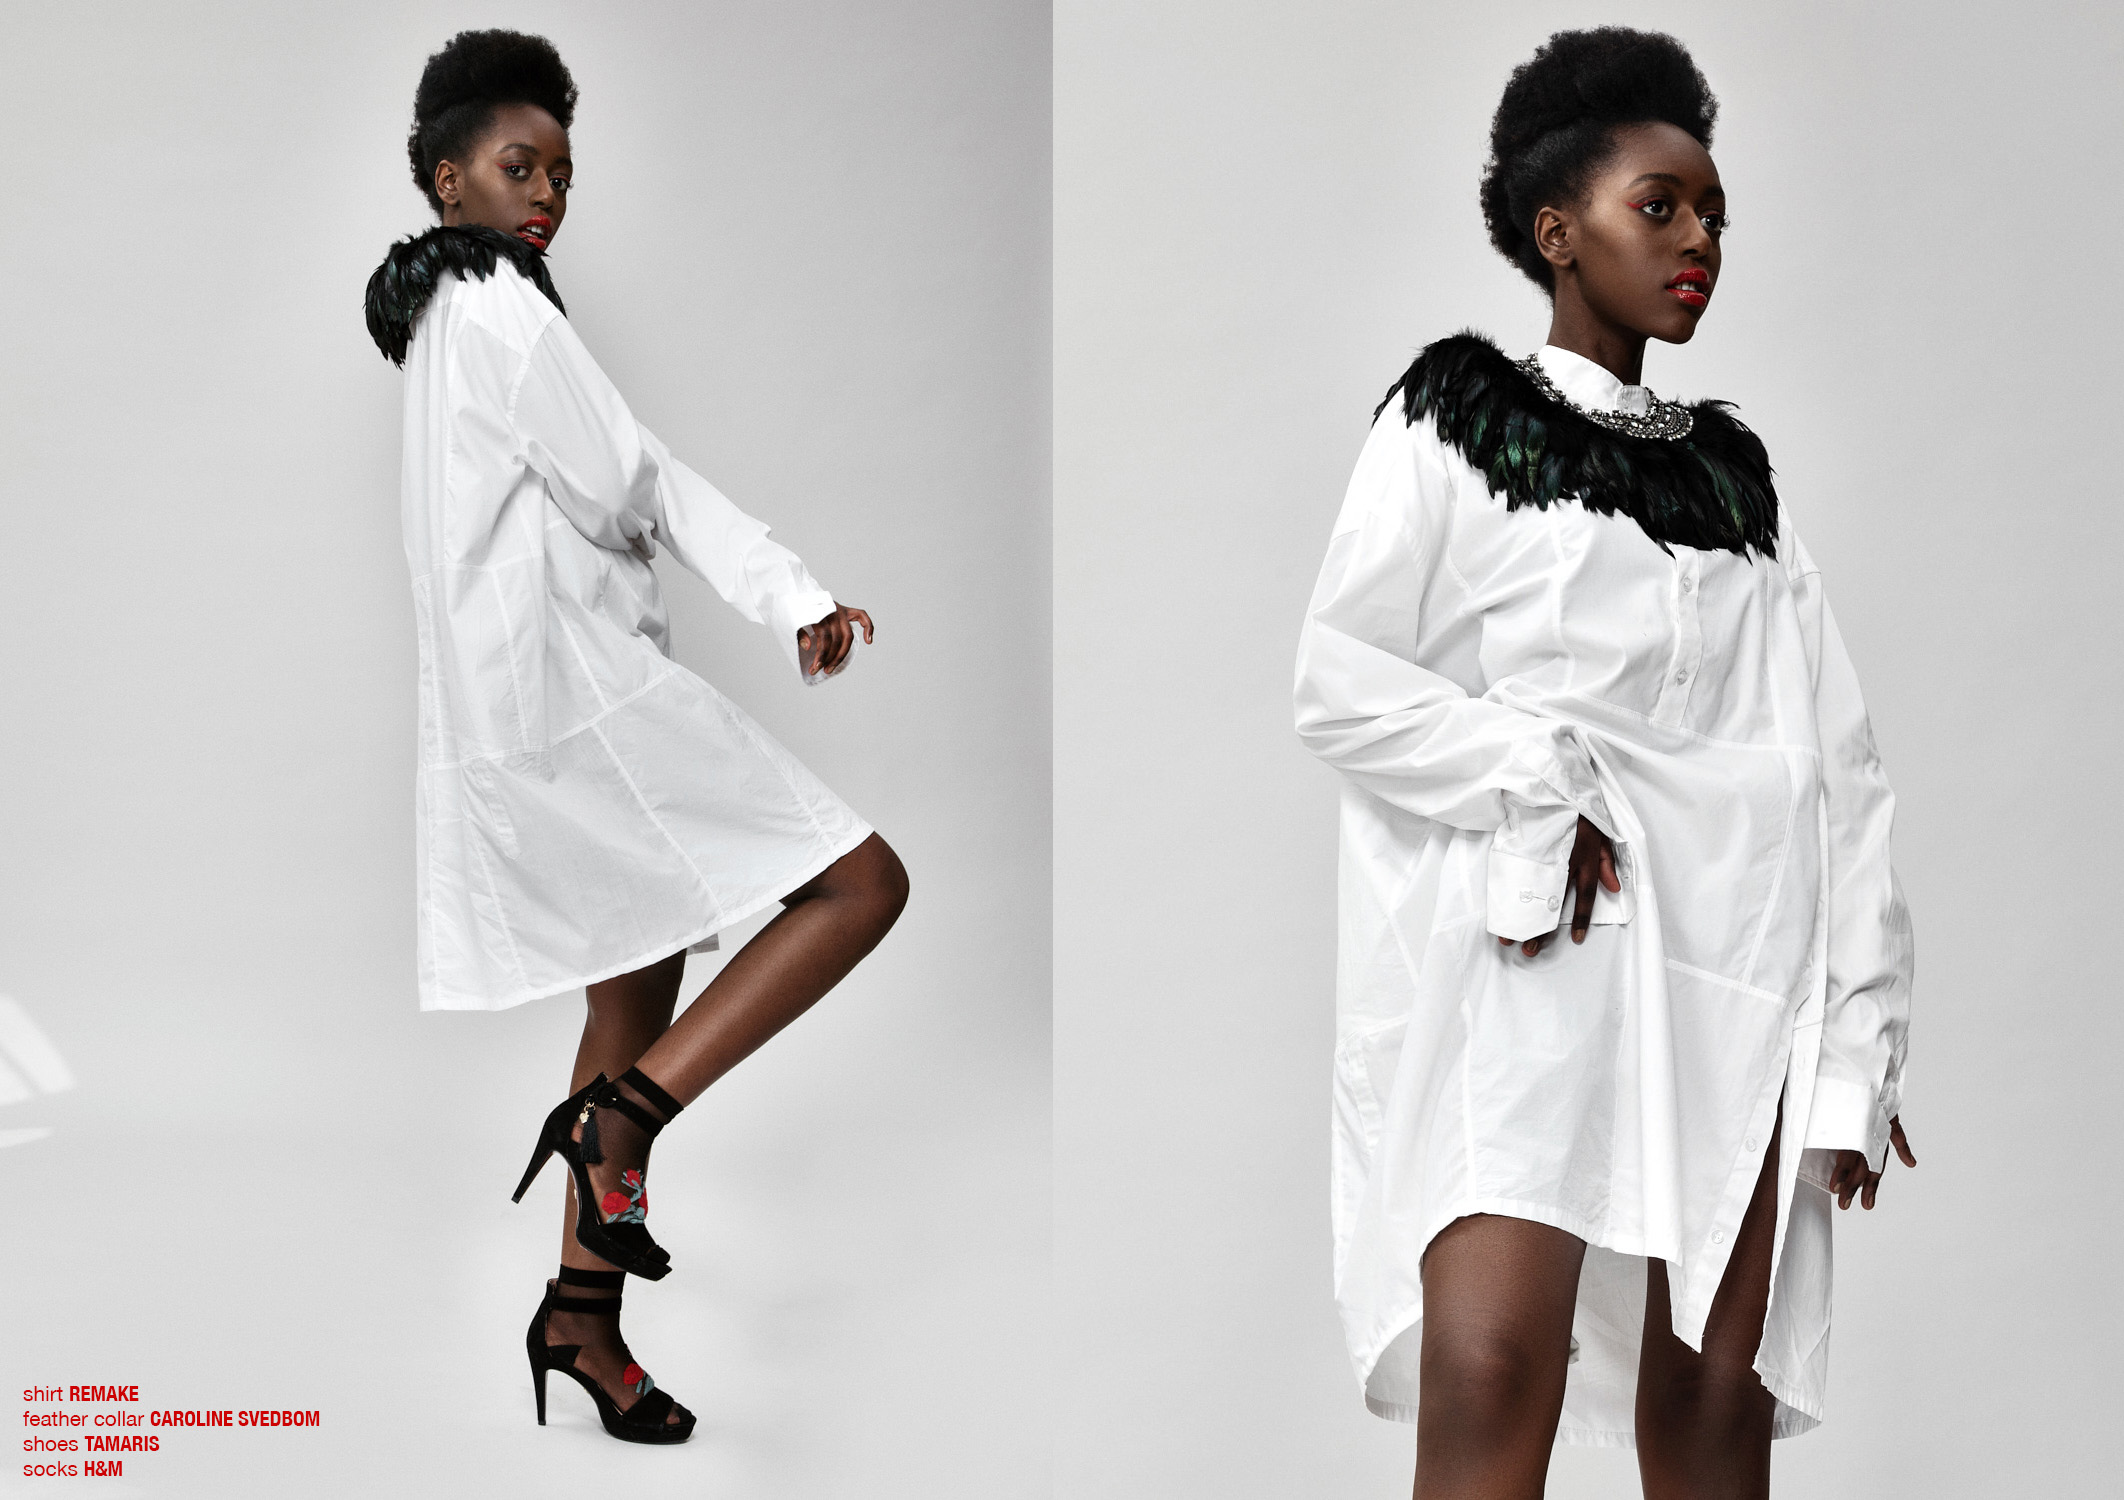 Krull magazine. Black model in white shirt dress and feather collar.